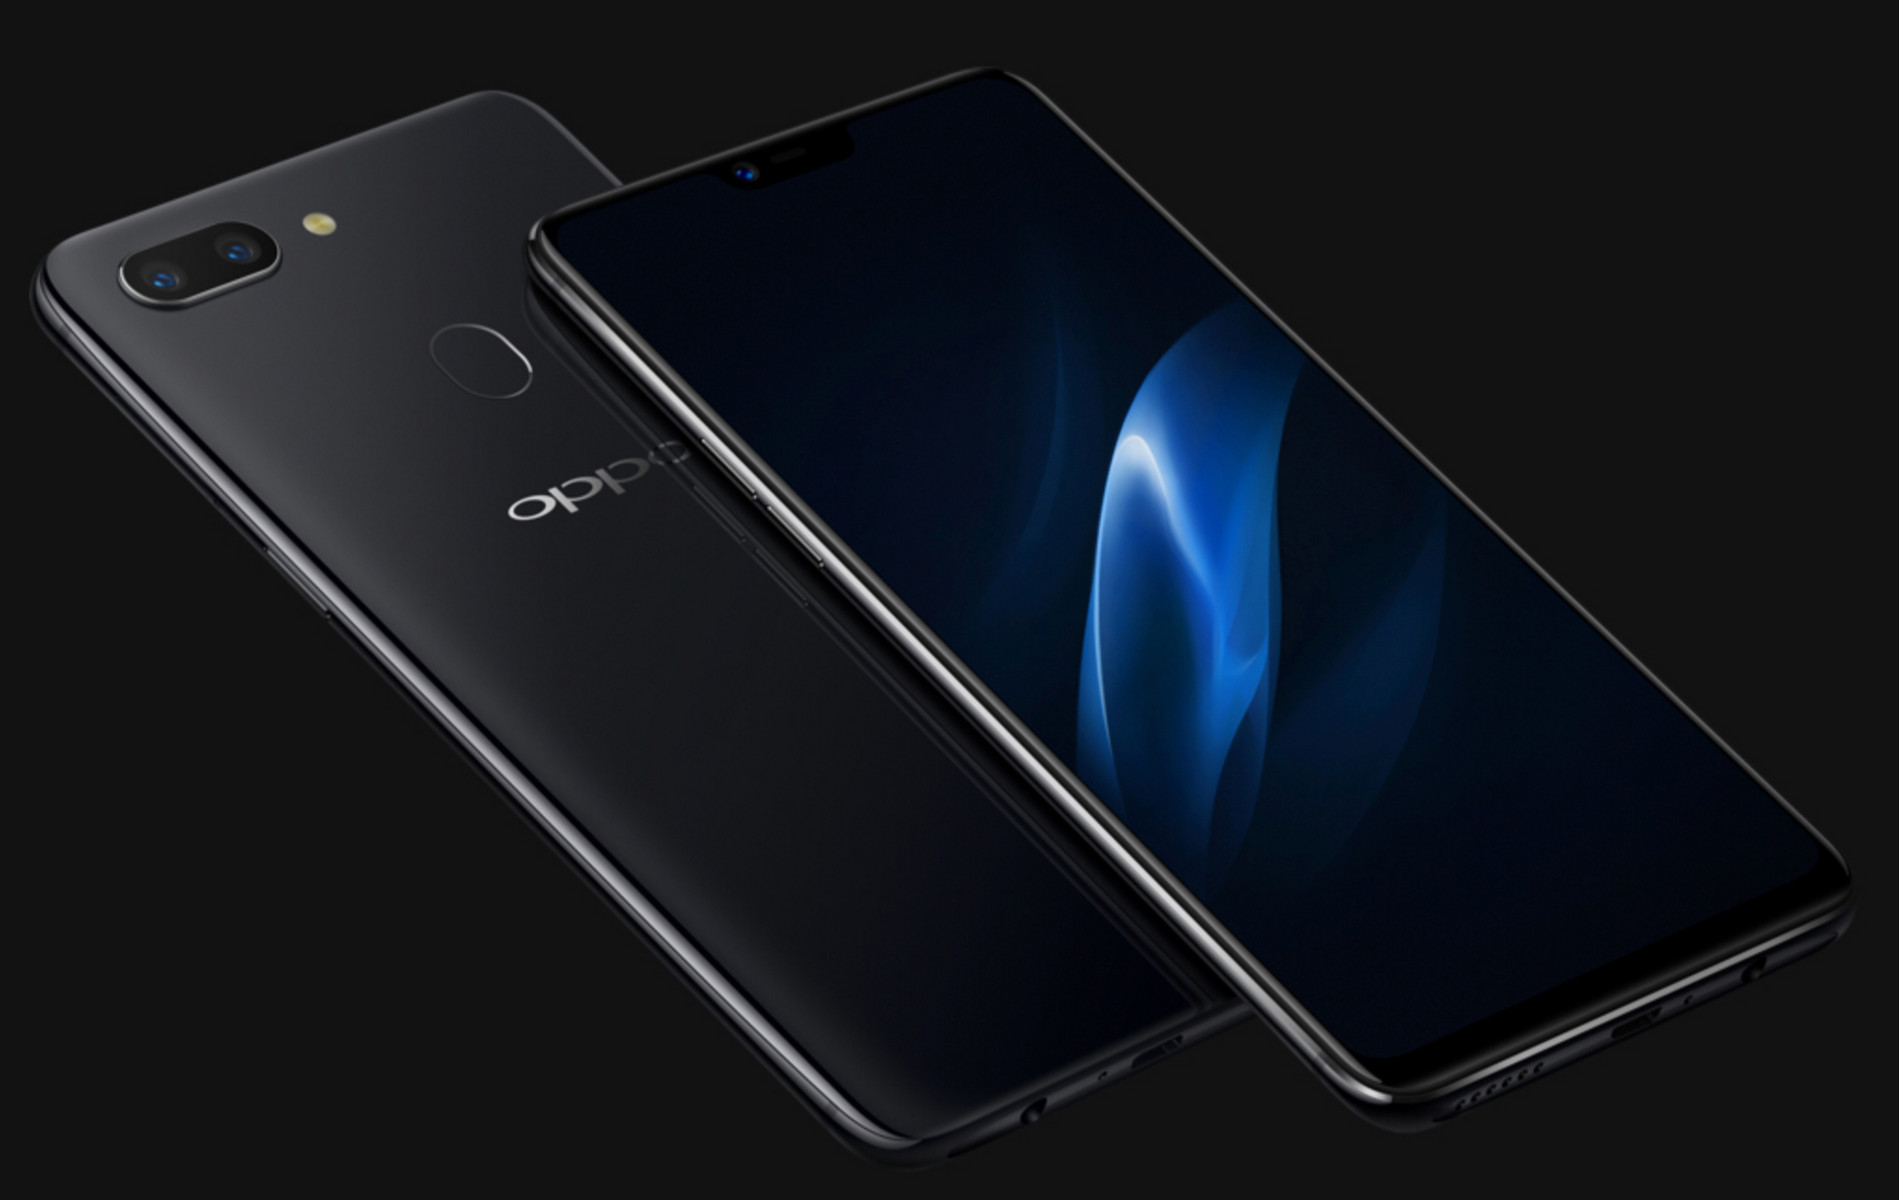 Oppo R15 and R15 Pro are official, notched displays in tow